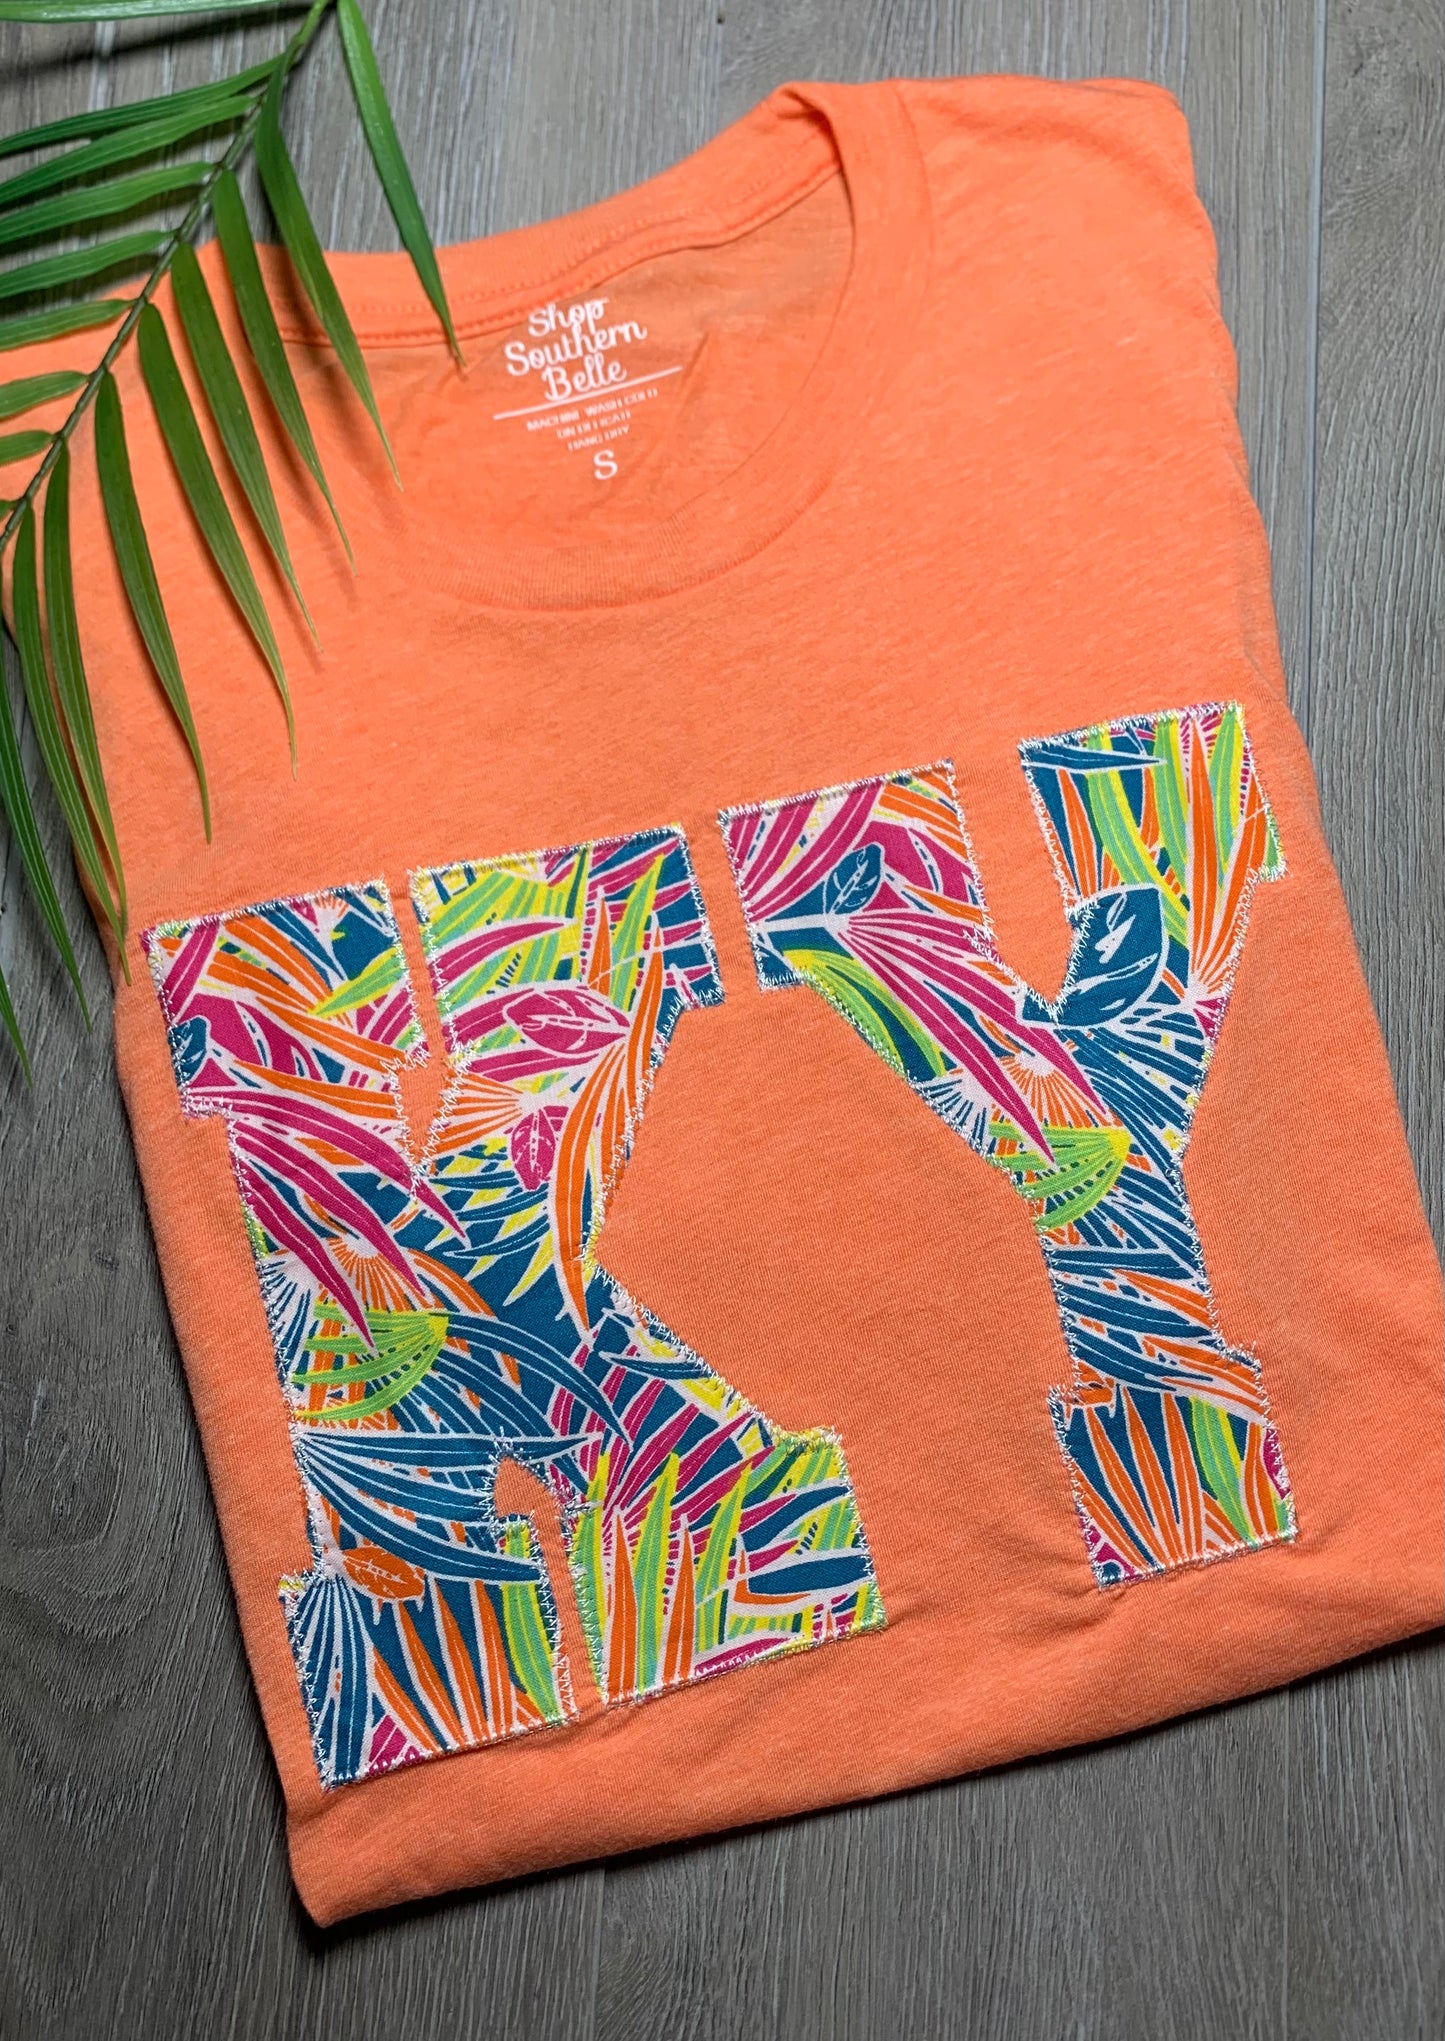 Tropic Like It’s Hot Short Sleeve -- ANY STATE